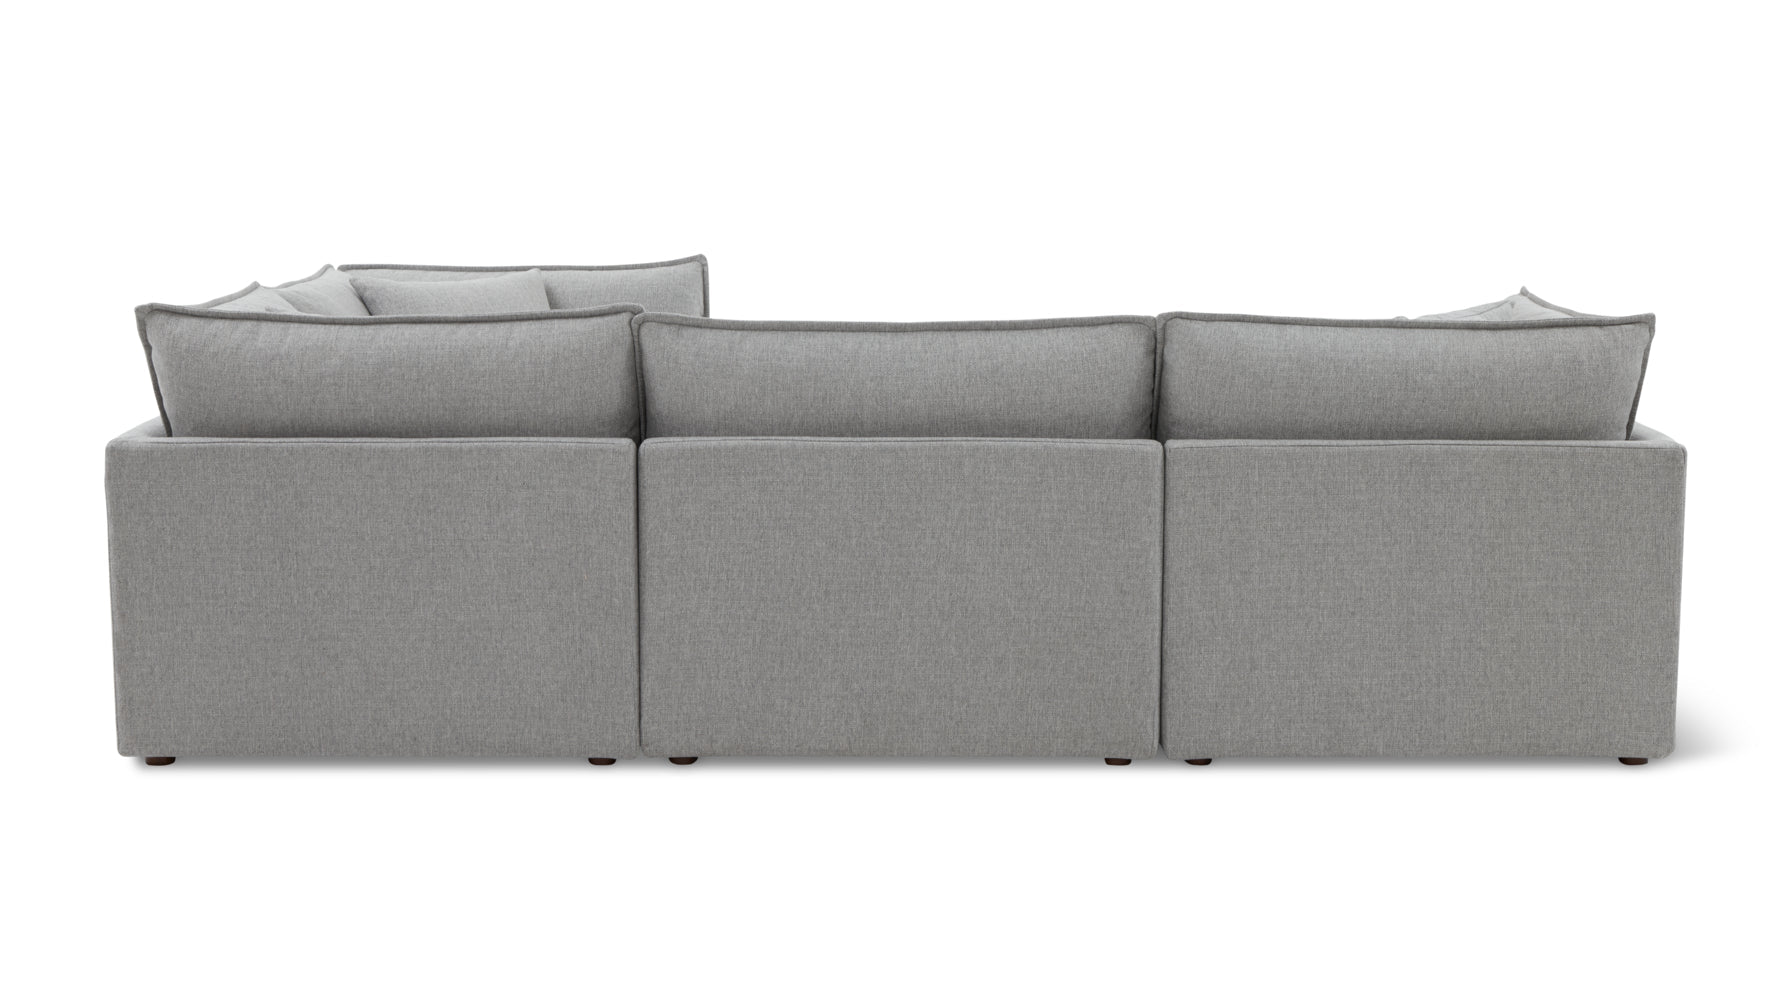 Chill Time 4-Piece Modular Sectional Closed, Heather - Image 4